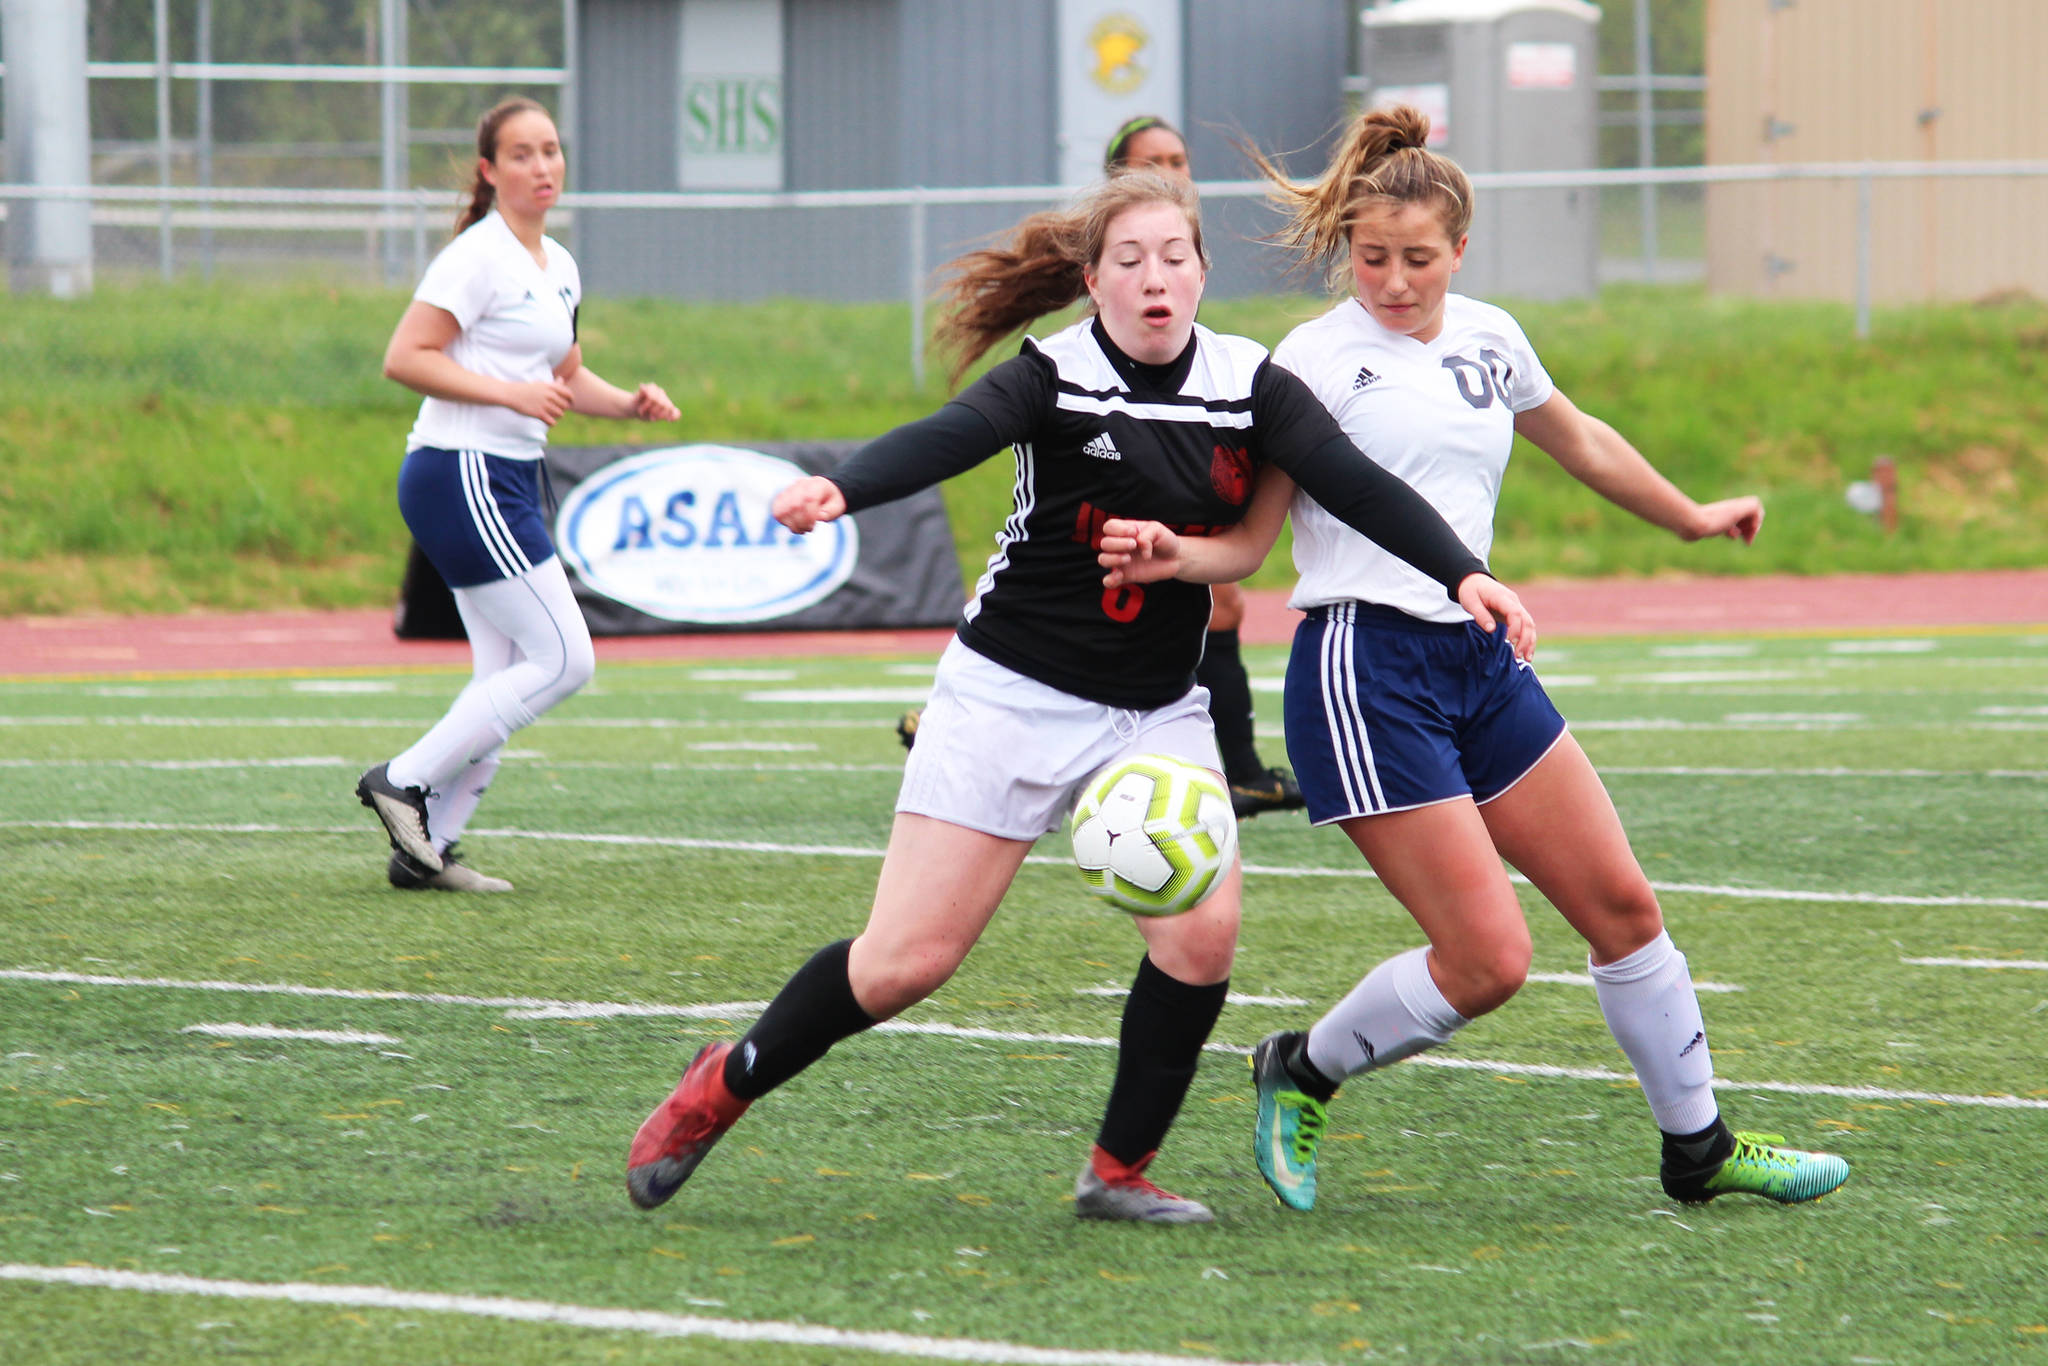 Juneau’s Eva Goering (left) and Soldotna’s Ryann Cannava battle for the ball during the final game of the Division II state soccer championships Saturday, May 25, 2019 at Service High School in Anchorage, Alaska. (Photo by Megan Pacer/Homer News)